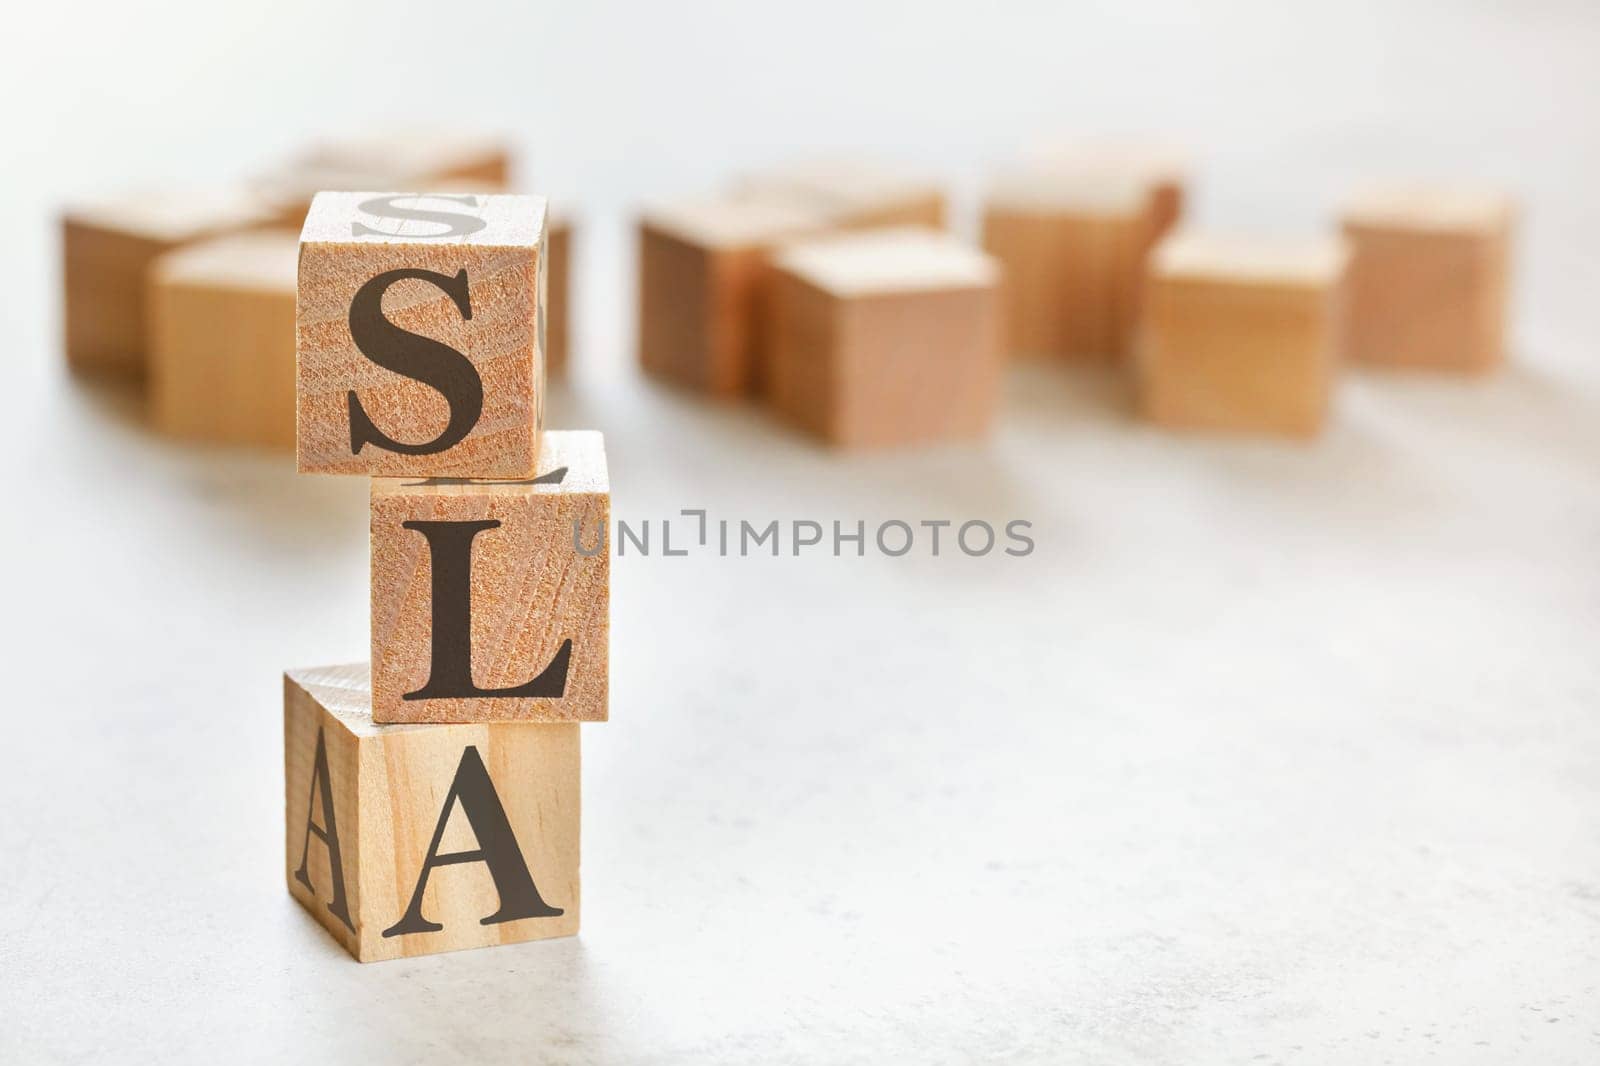 Three wooden cubes with letters SLA (means Service Level Agreement), on white table, more in background, space for text in right down corner by Ivanko